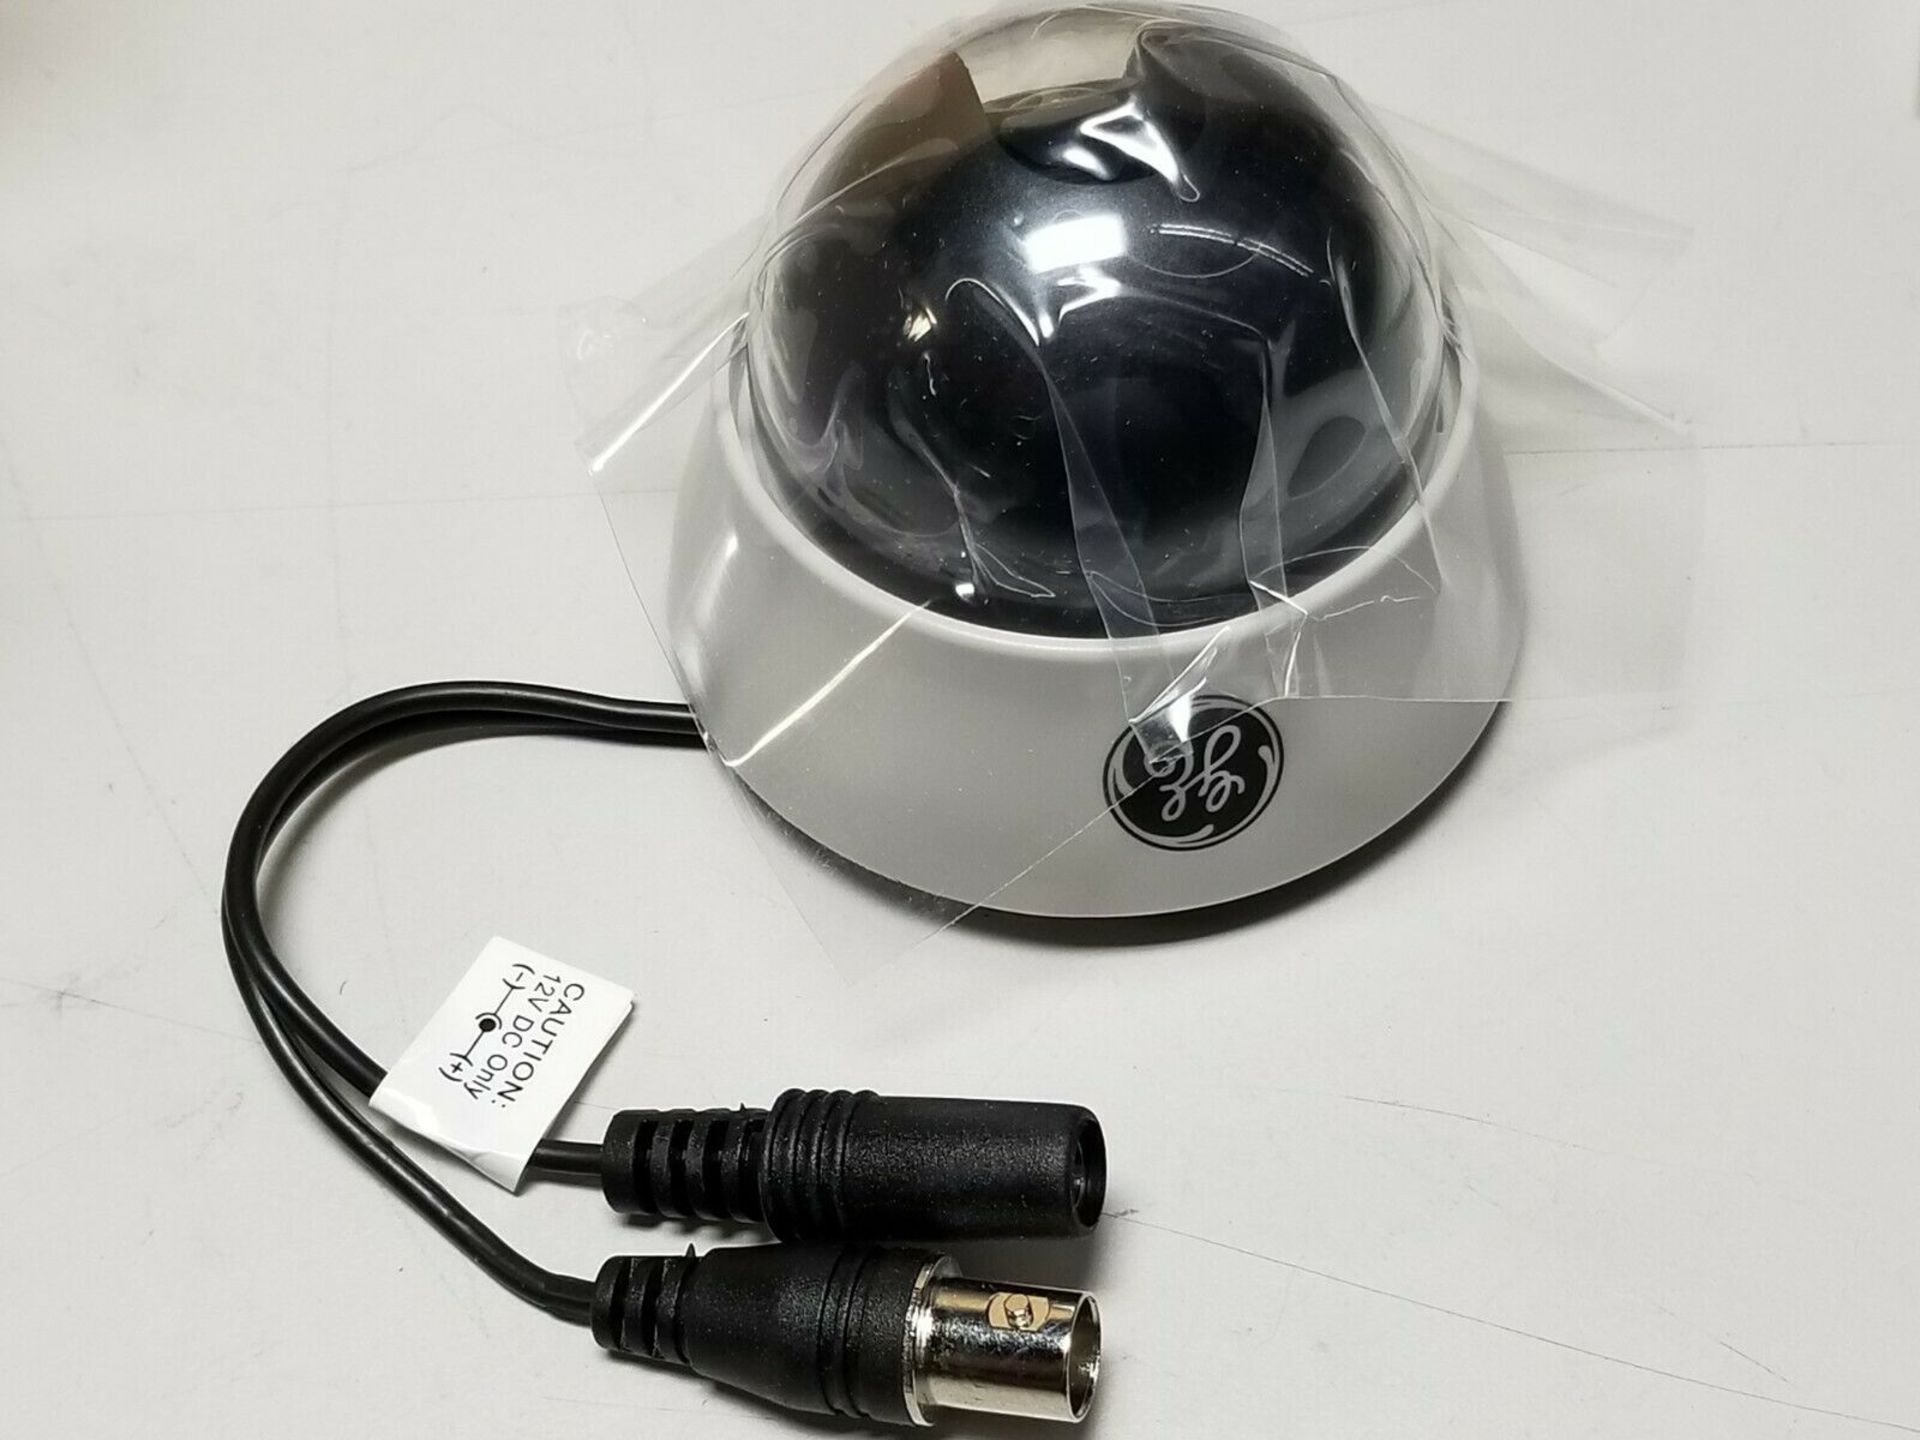 NEW GE COLOR DOME SECURITY CAMERA - Image 6 of 7